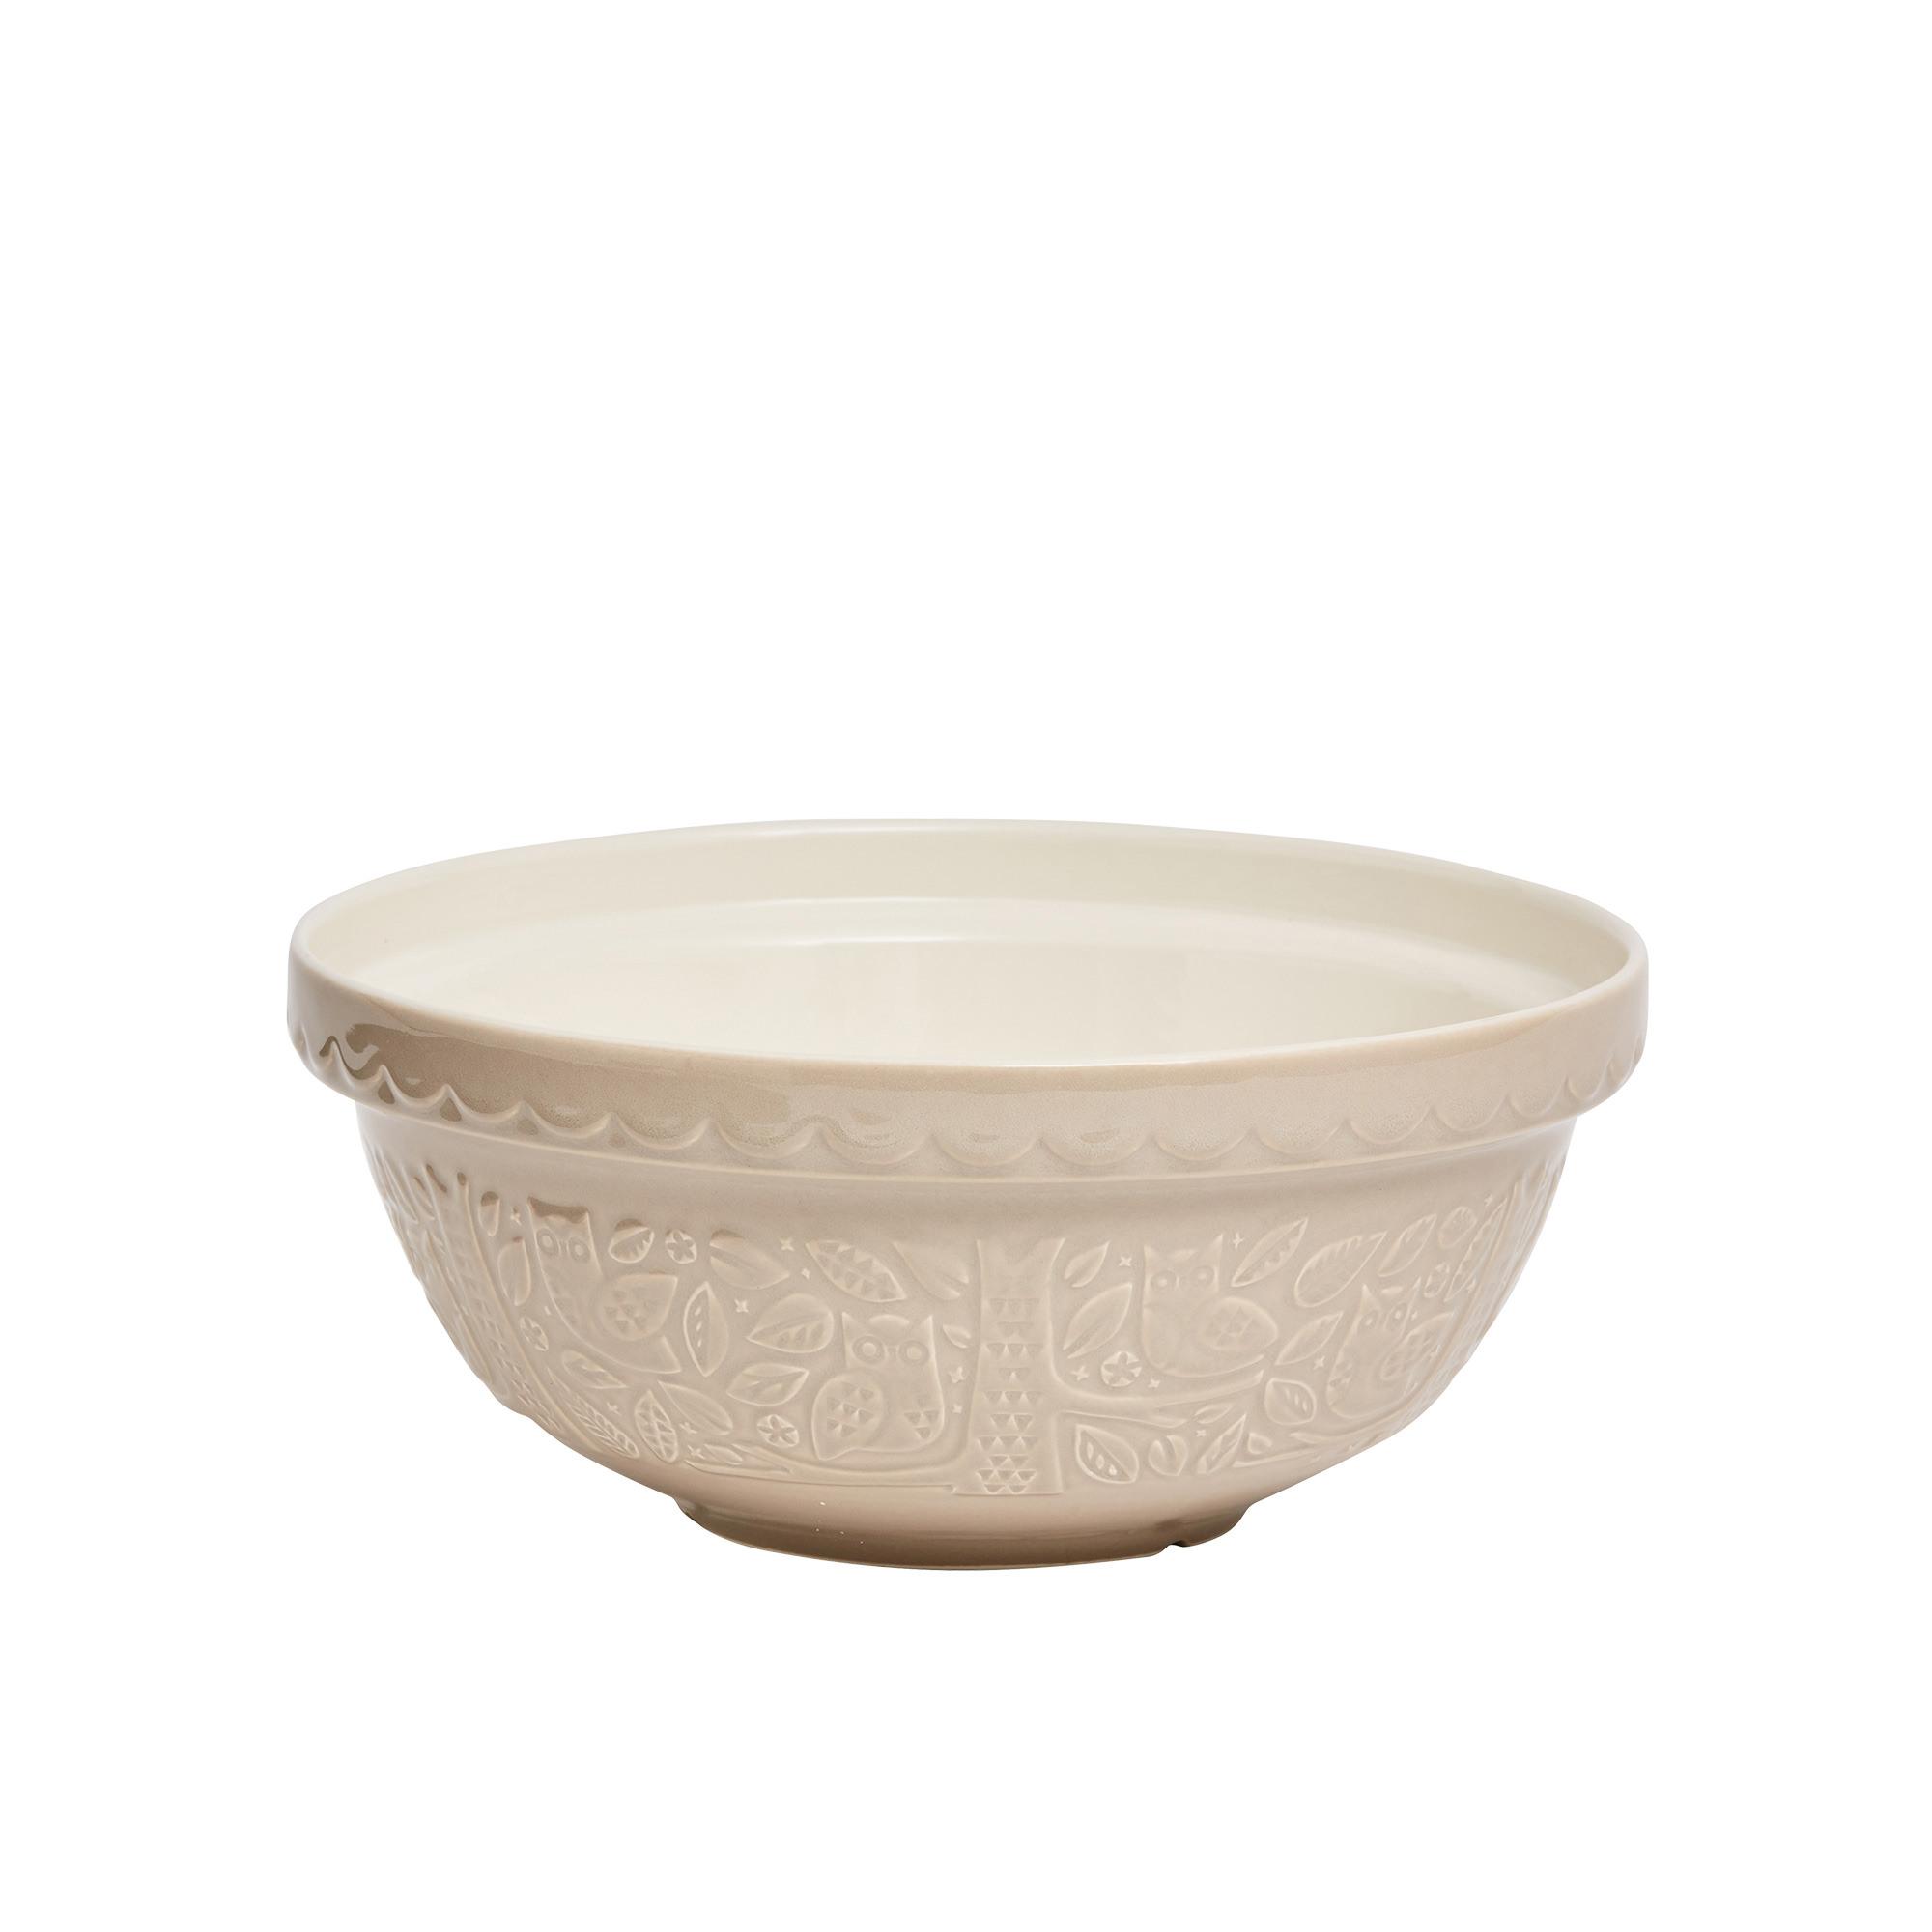 Mason Cash In The Forest Mixing Bowl 26cm - 2.7L Owl Stone Image 1